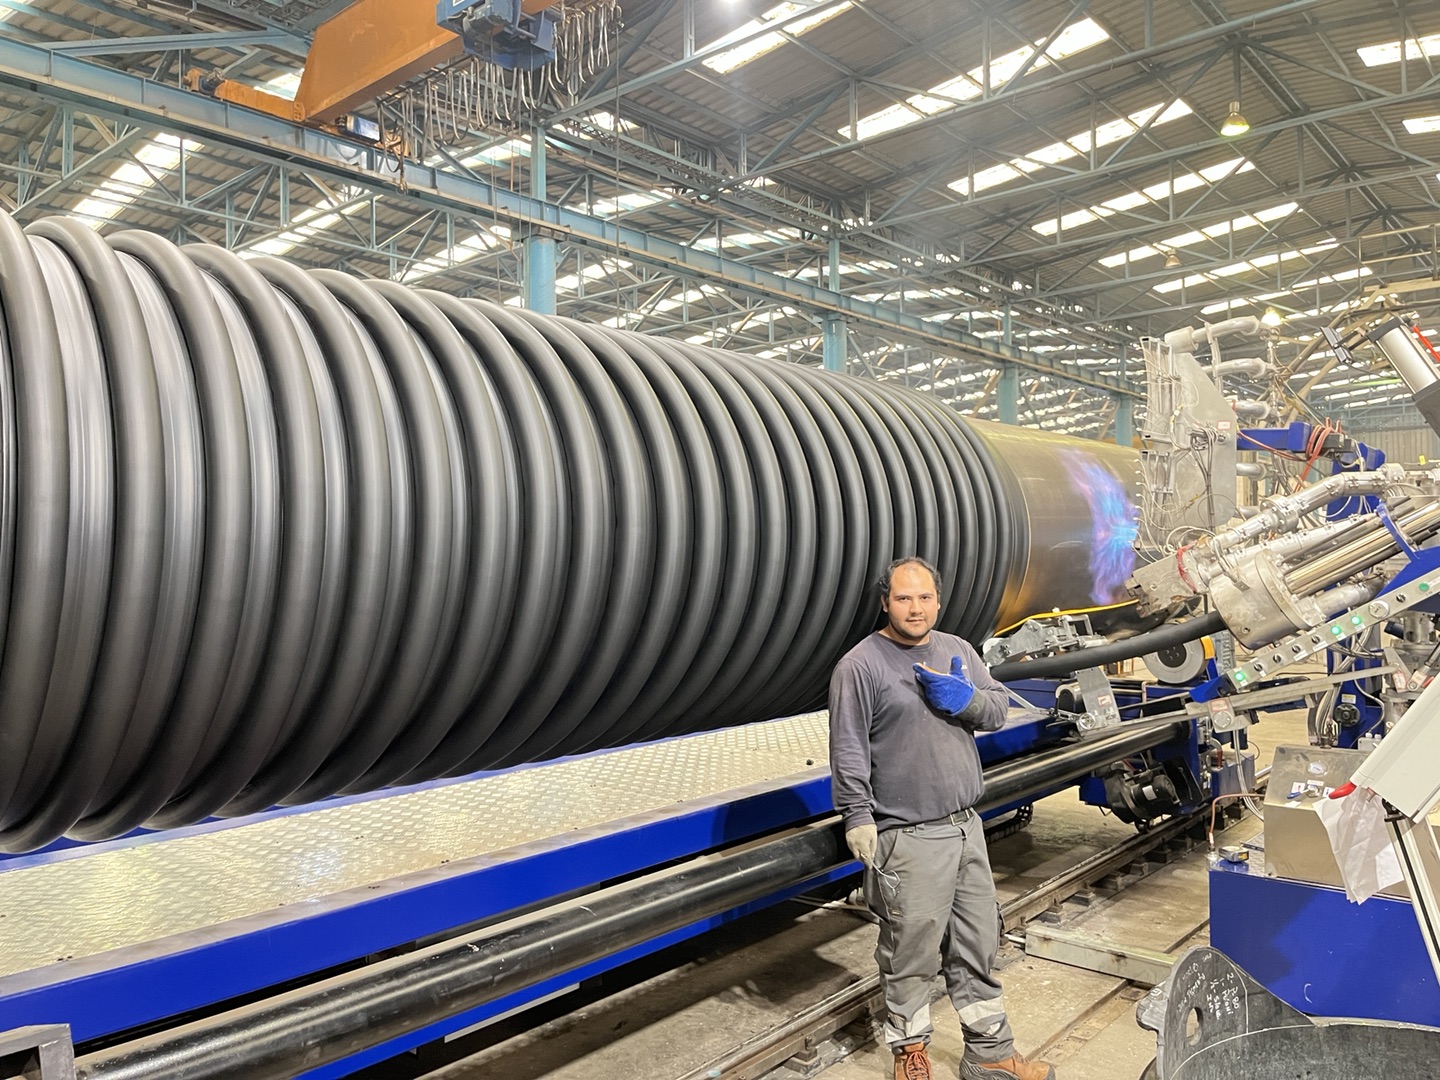 HDPE spiral pipe machine,krah pipe, krah pipe machine, helical extrusion, profilline pipe,profileen pipe, profilline machine,structured wall non-pressure pipes